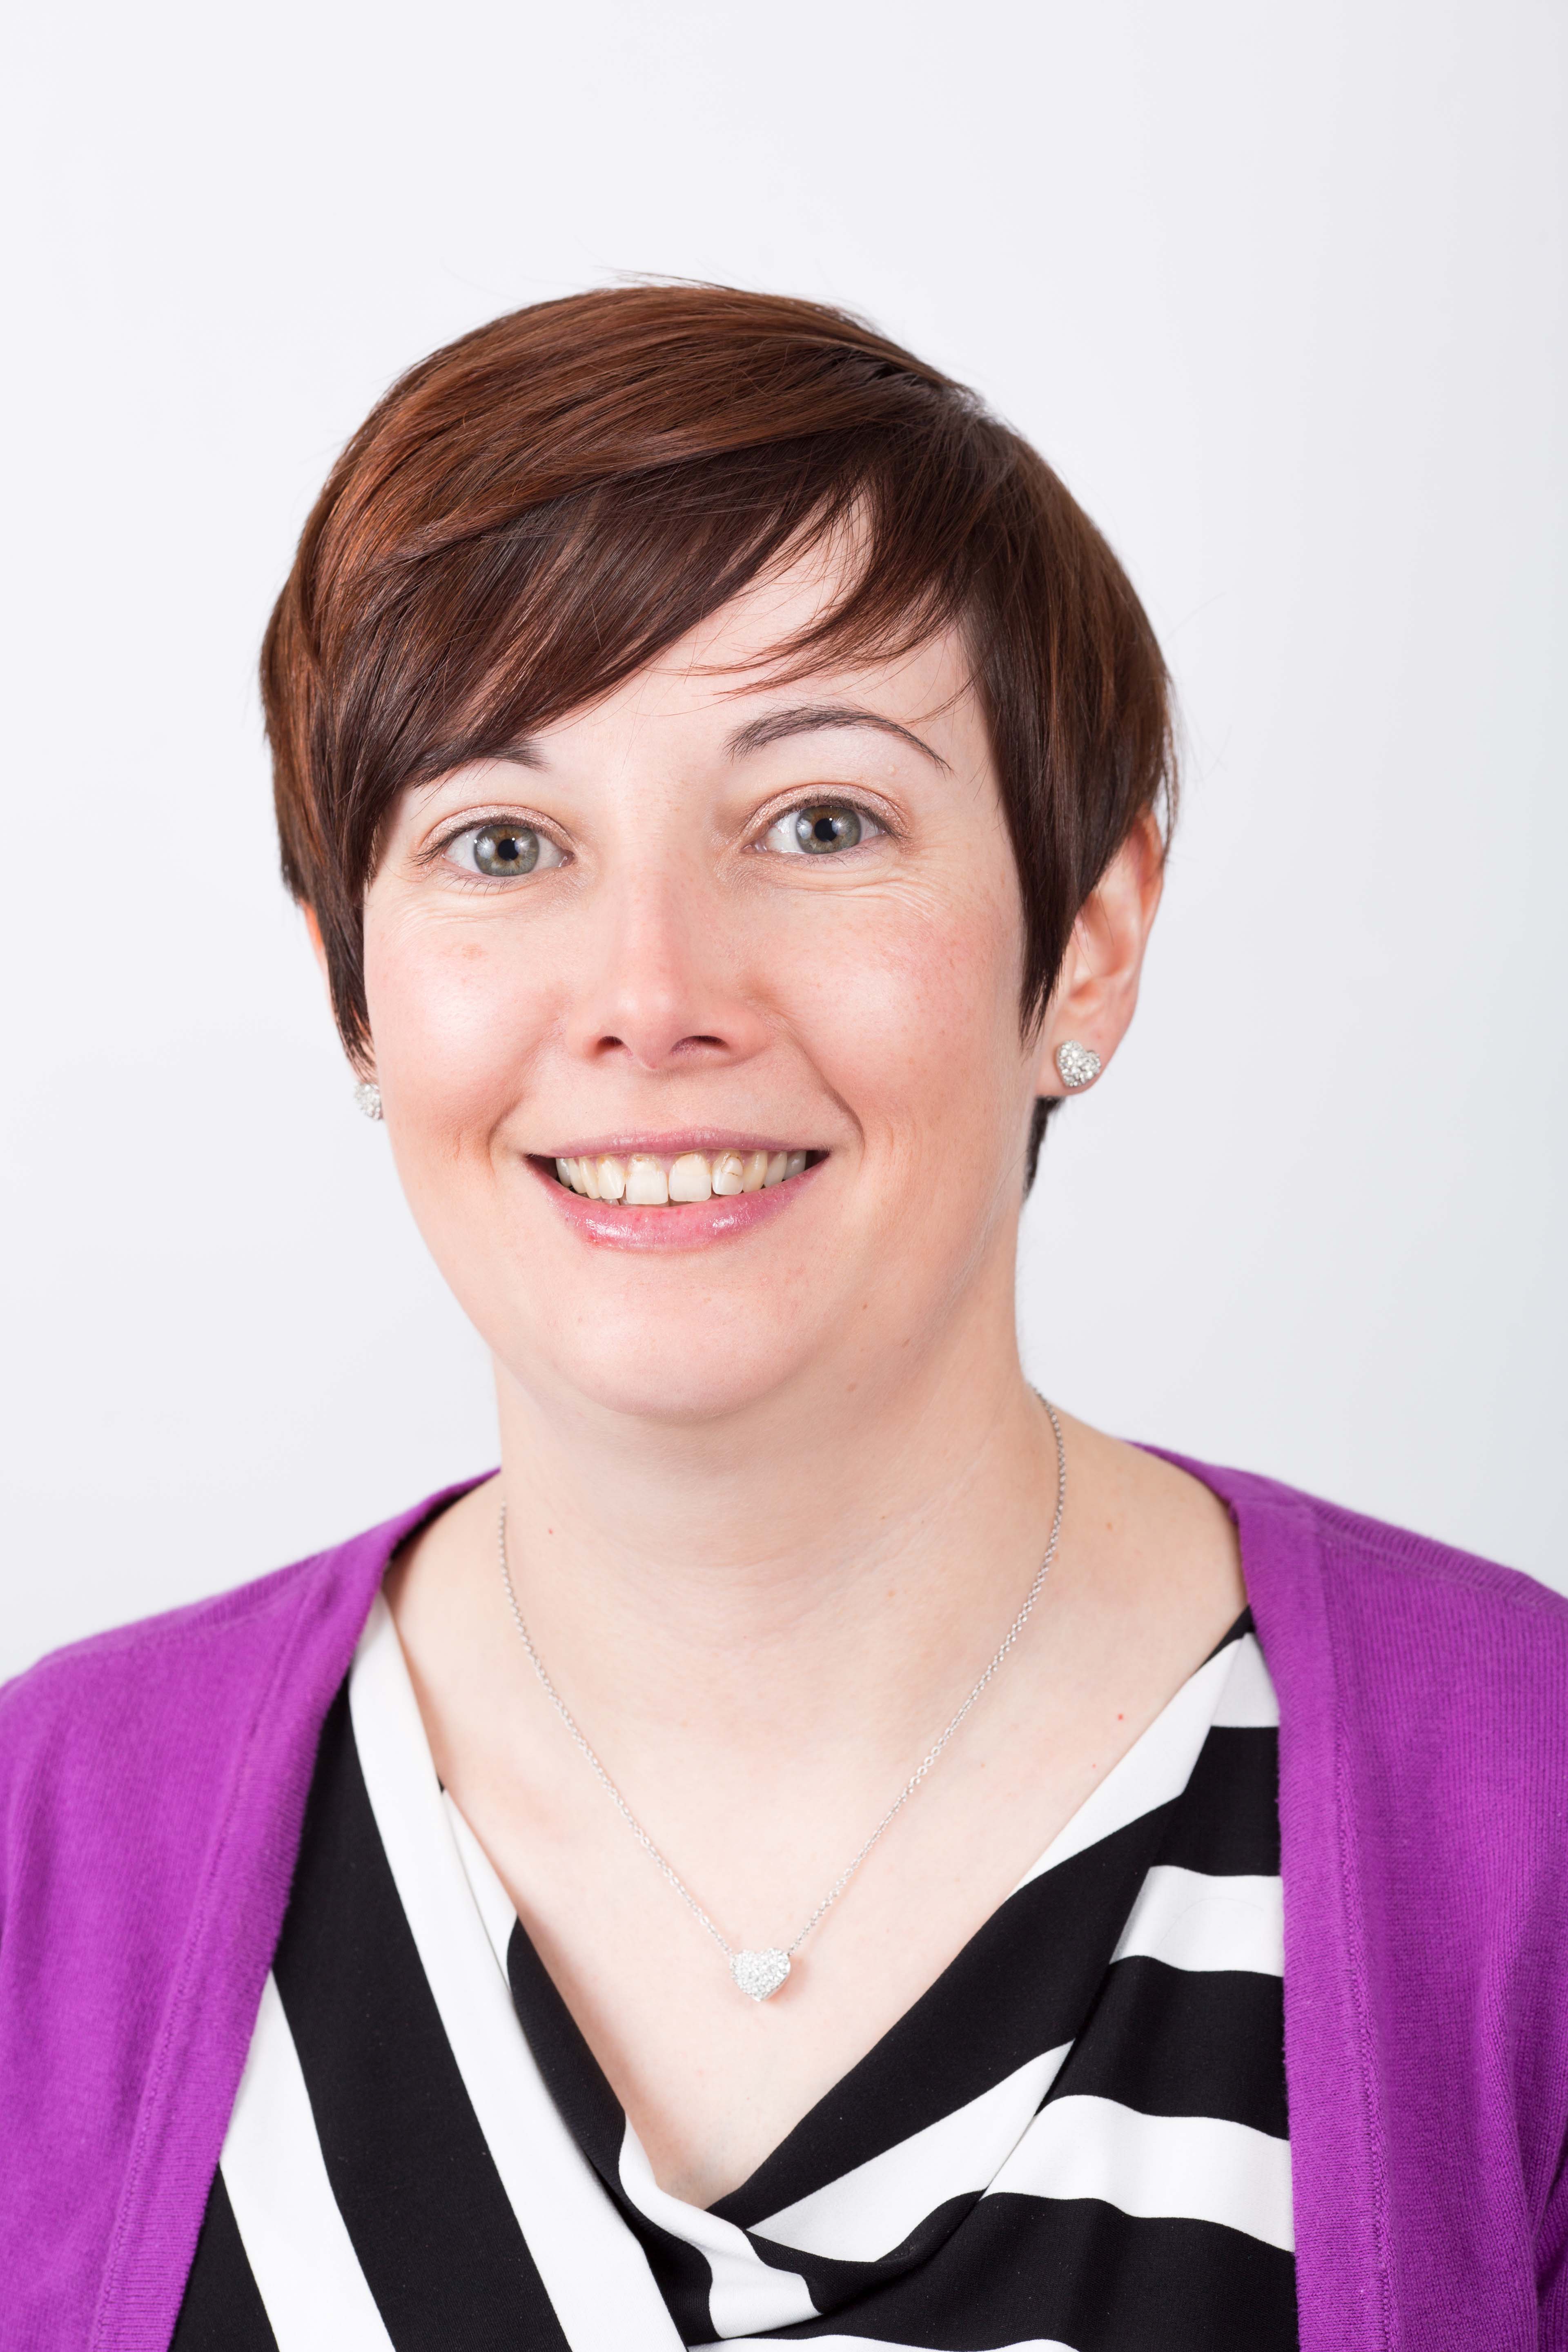 Heather Foster, Corporate Account Manager, ENER-G Combined Power Ltd